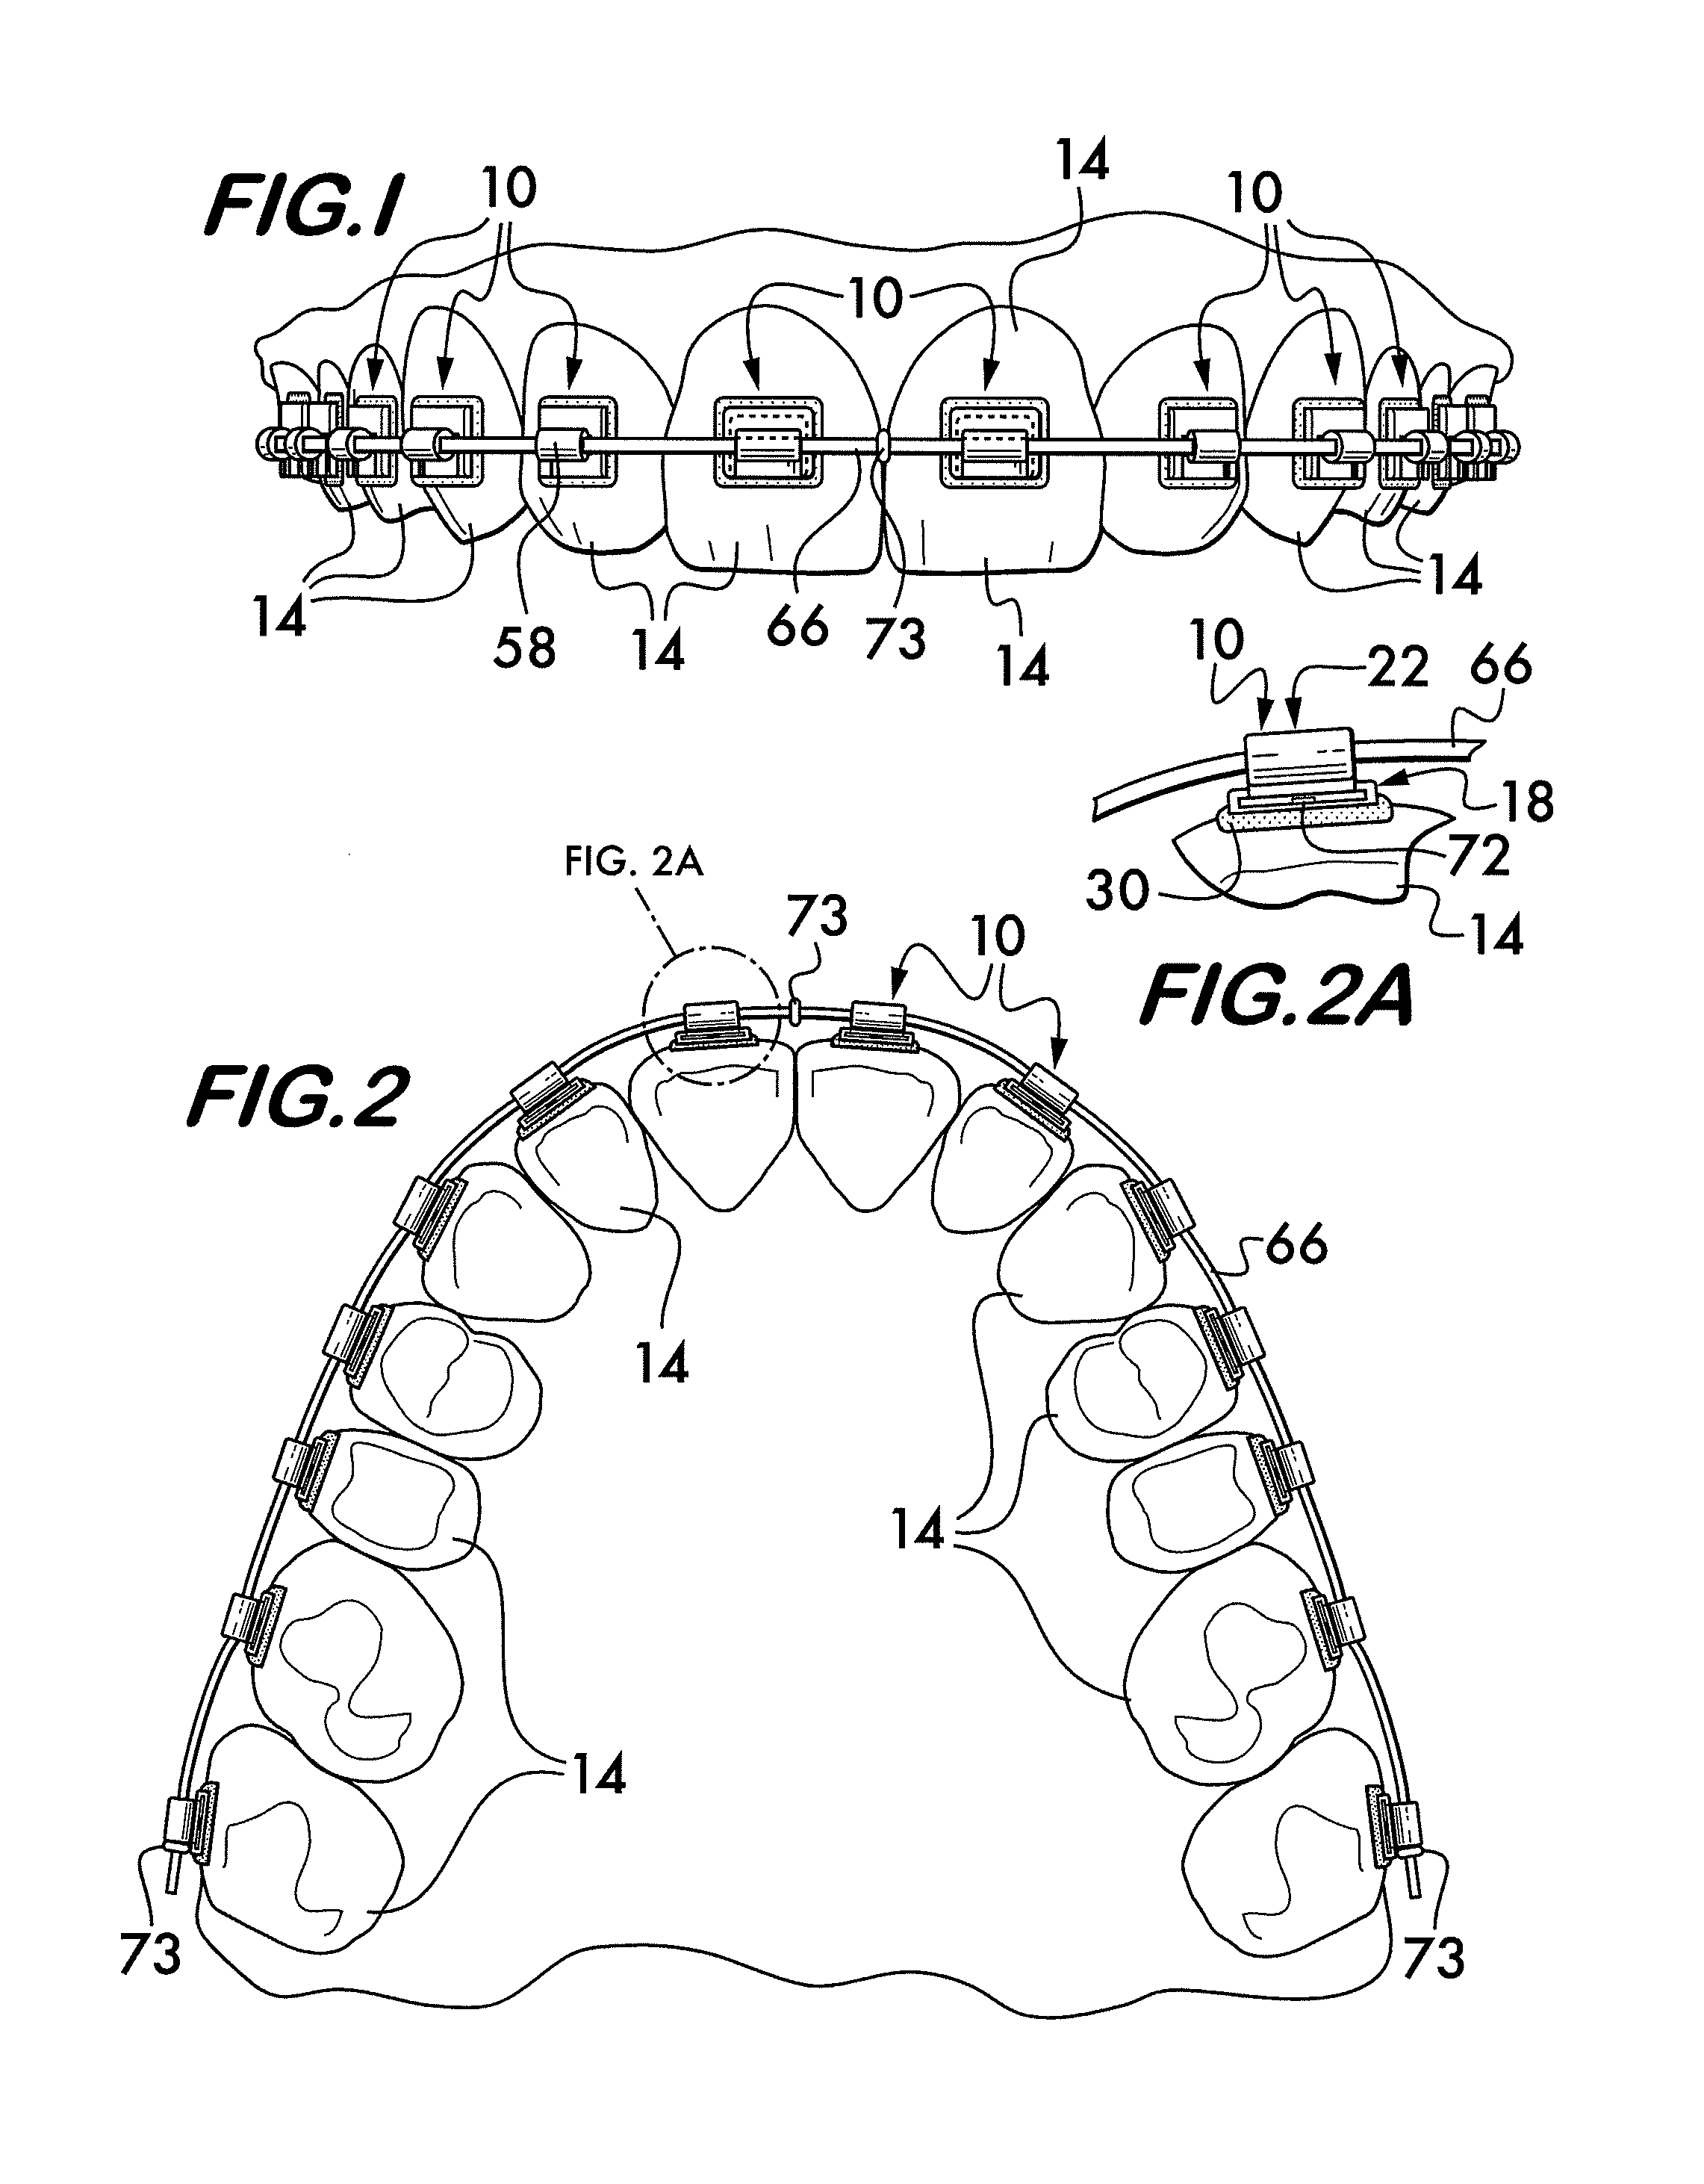 Multi-component orthodontic bracket assembly